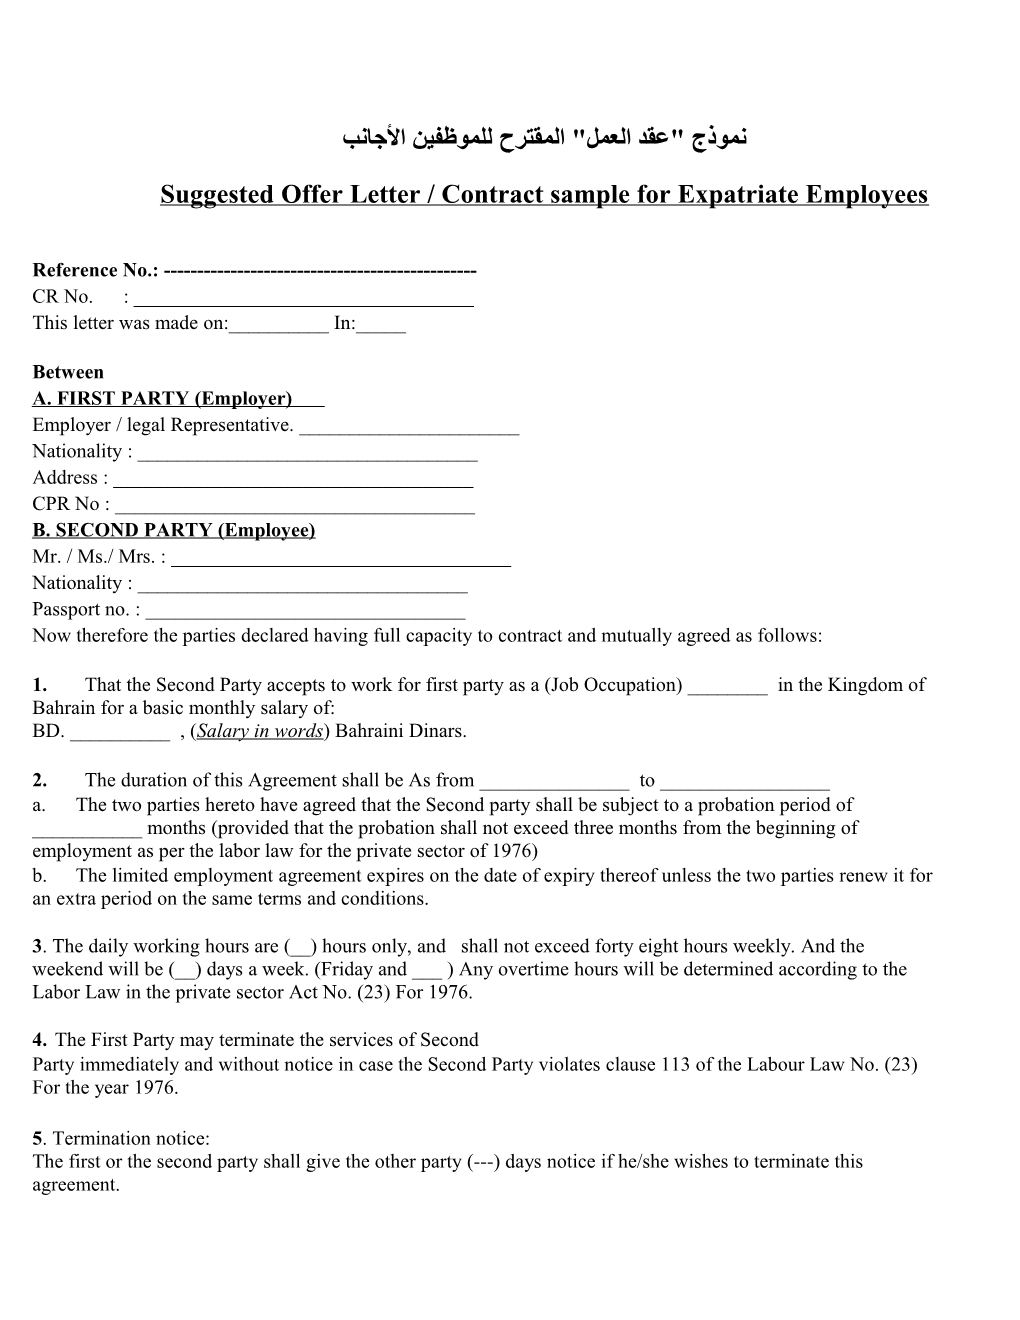 Suggested Offer Letter / Contract Sample for Expatriate Employees